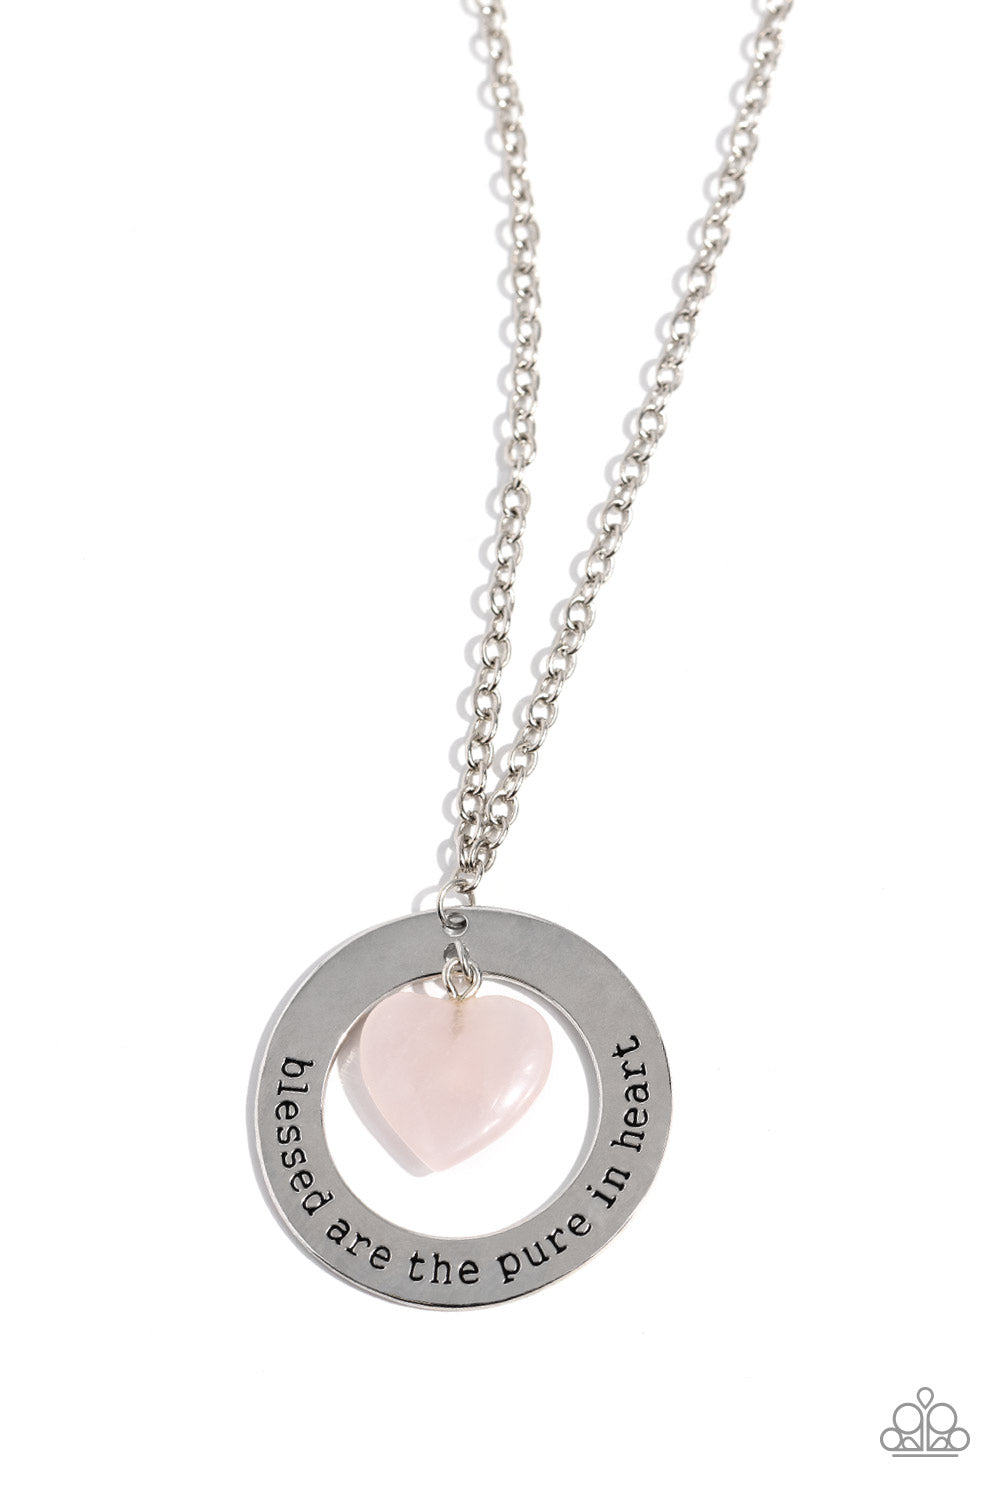 A pink stone heart swings from the bottom of an oversized silver hoop fitting, creating a simplistically earthy pendant at the bottom of a classic silver chain. The phrase "blessed are the pure in heart" is stamped along the curve of the silver hoop frame, finishing the design off with an inspirational finish. Features an adjustable clasp closure. As the stone elements in this piece are natural, some color variation is normal.     Sold as one individual necklace. Includes one pair of matching earrings.